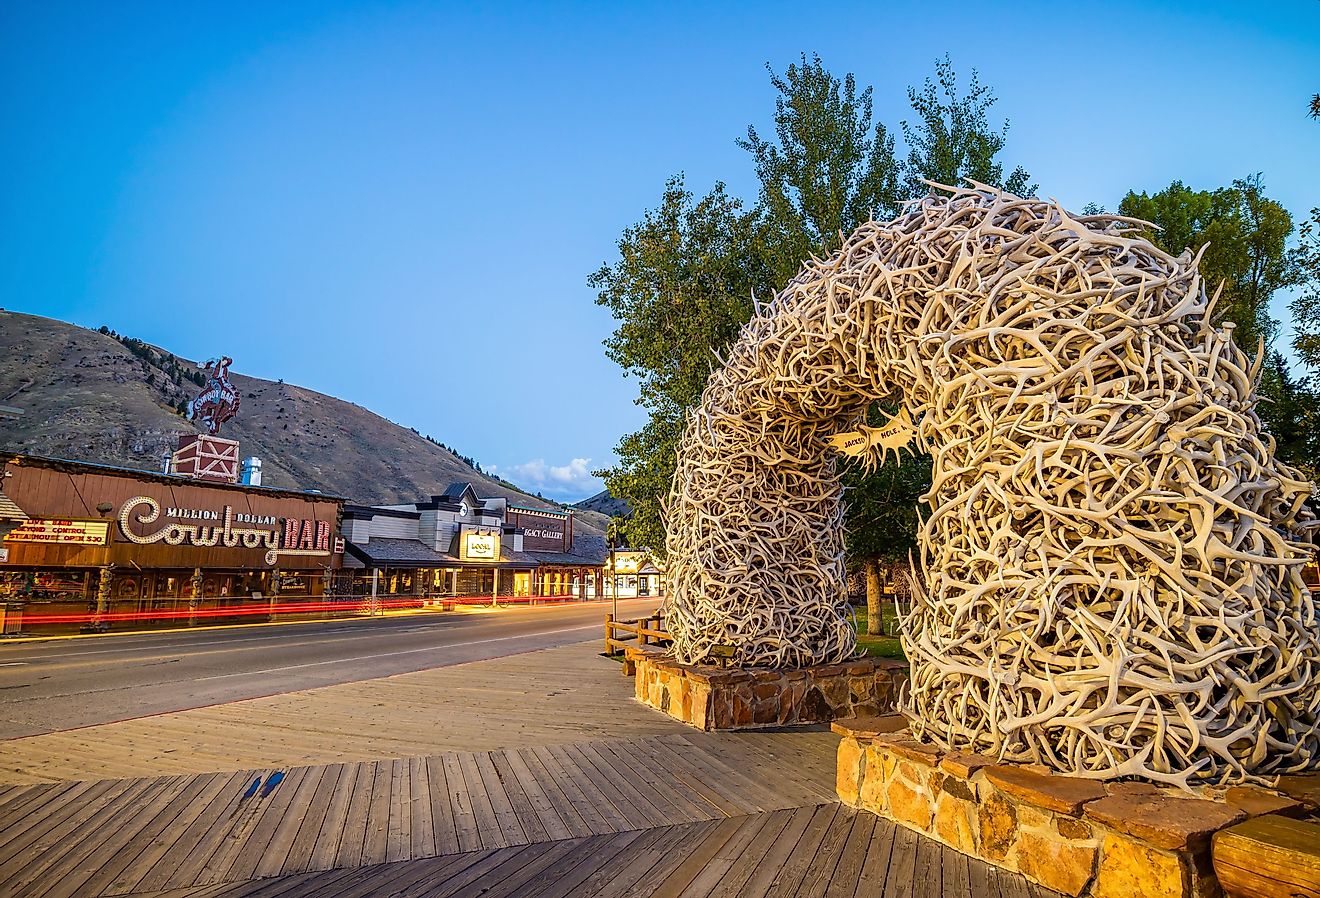 Famous Antler Arch and historic buildings at Jackson Town Square, Wyoming. Image credit f11photo via Shutterstock